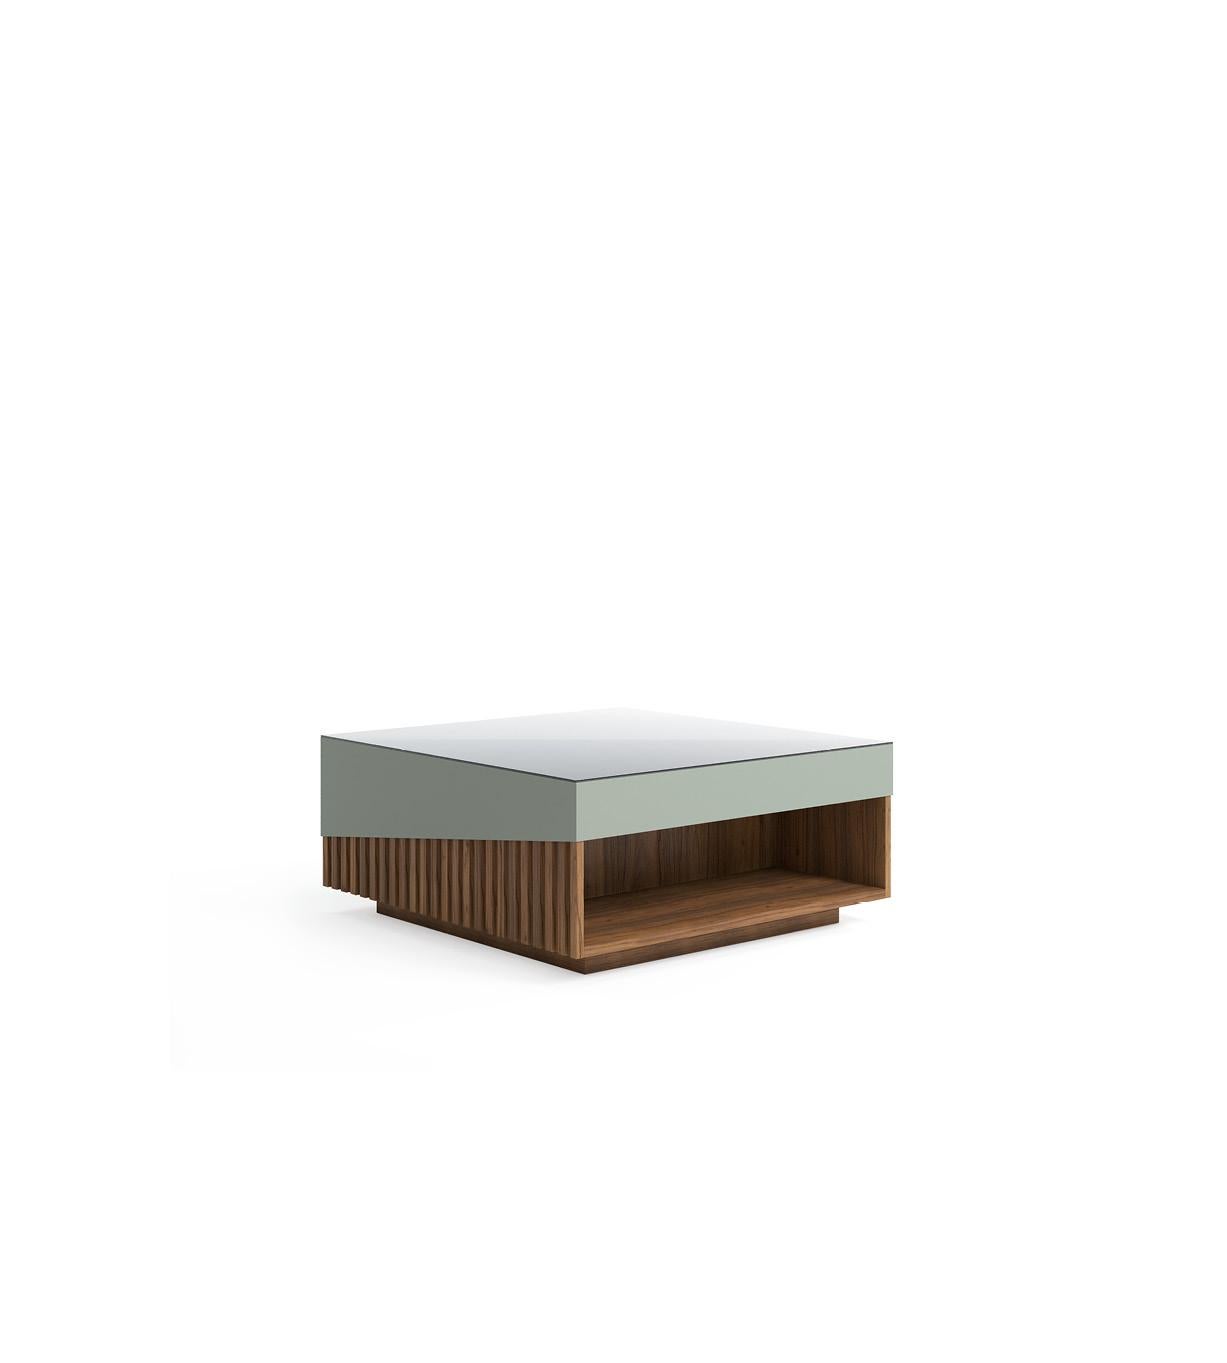 This coffee table is a perfect addition to any classic and exquisite ambiance.